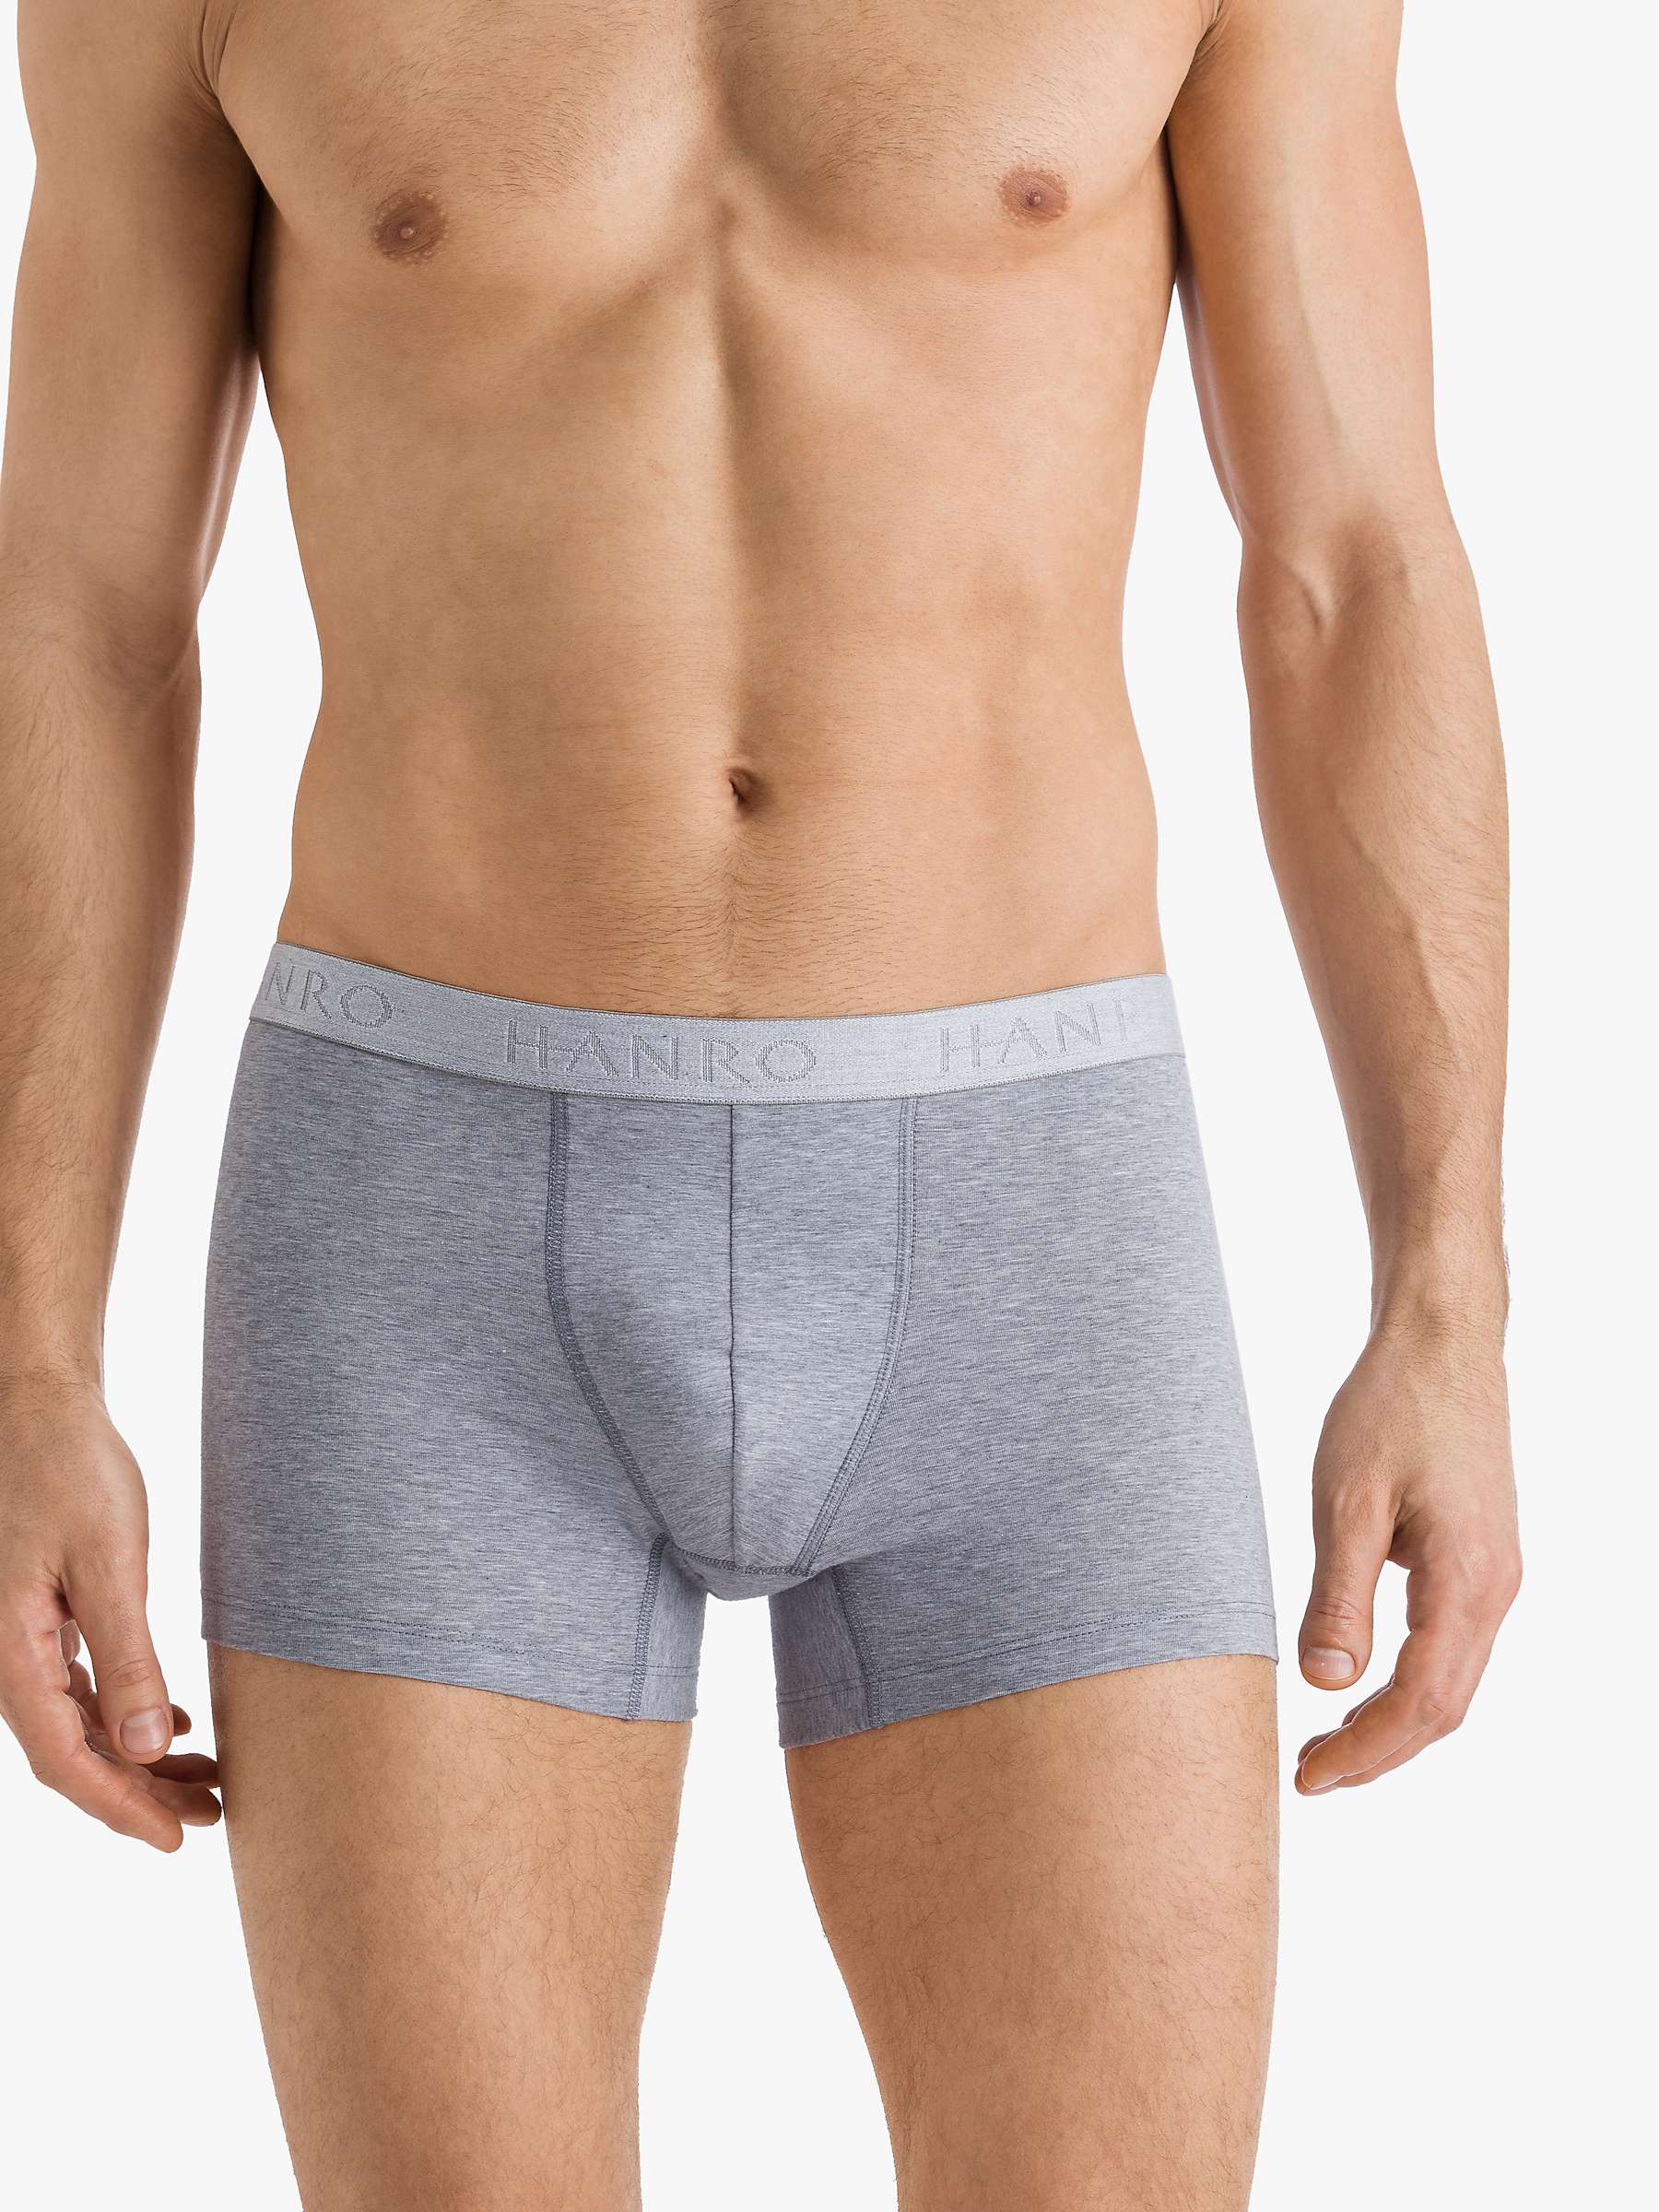 Buy Hanro Stretch Cotton Trunks, Pack of 2 Online at johnlewis.com